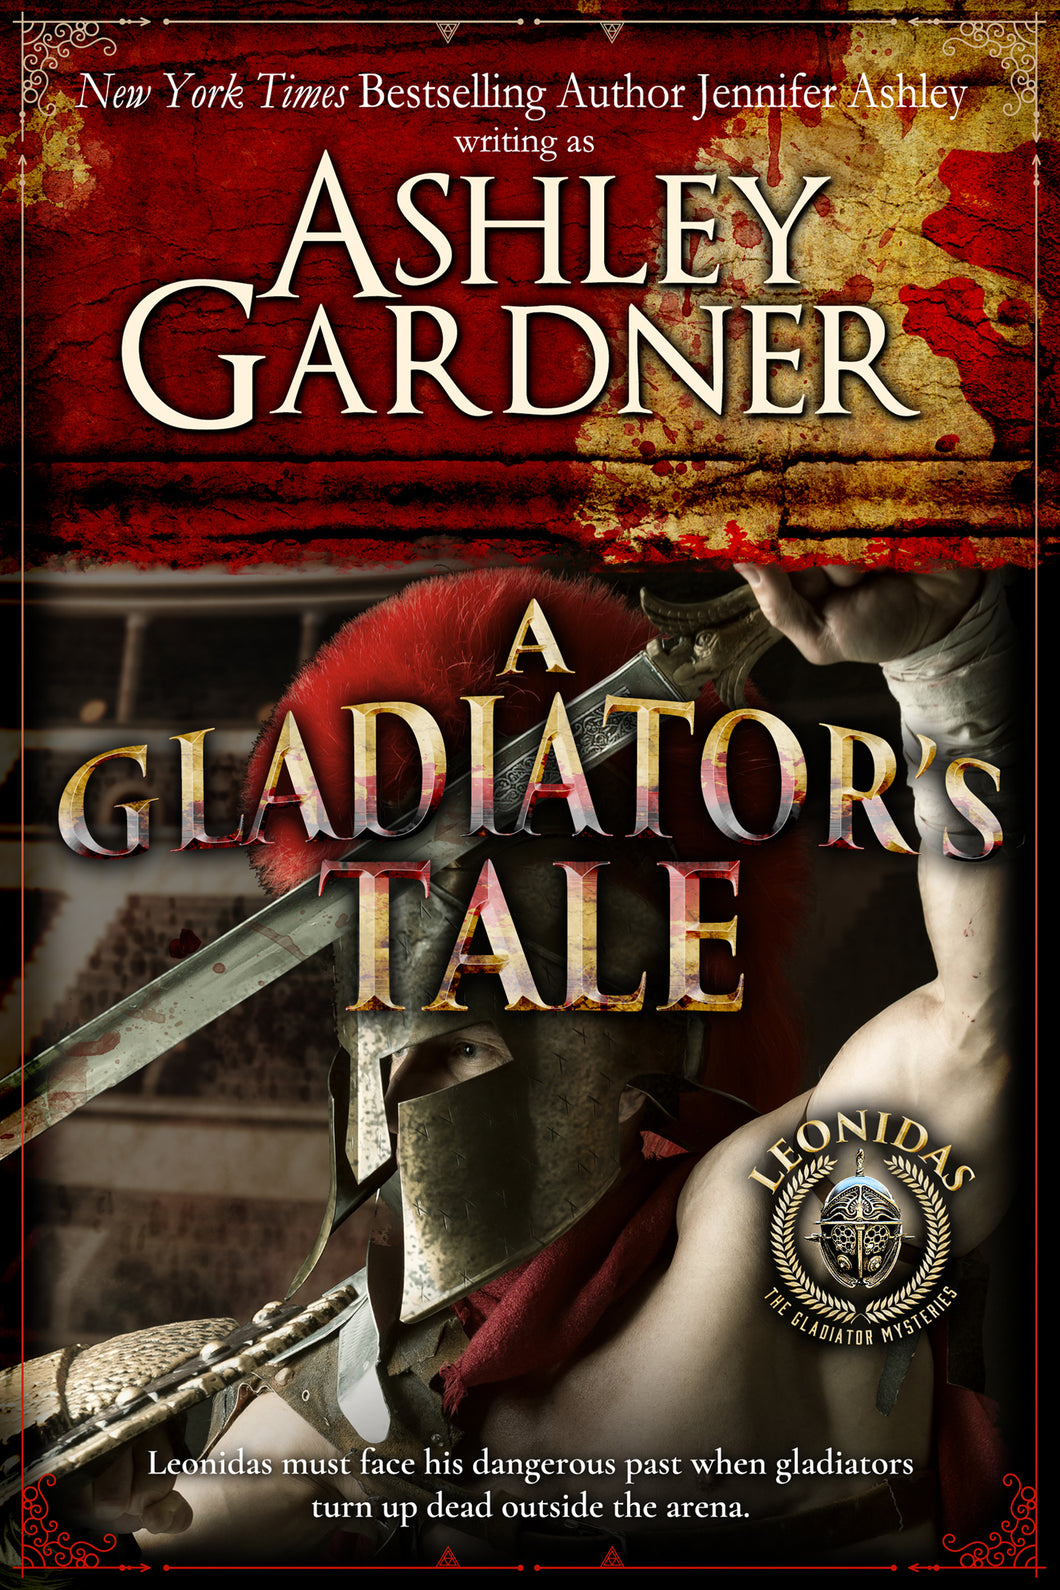 A Gladiator's Tale (Leonidas the Gladiator Mysteries, Book 2)